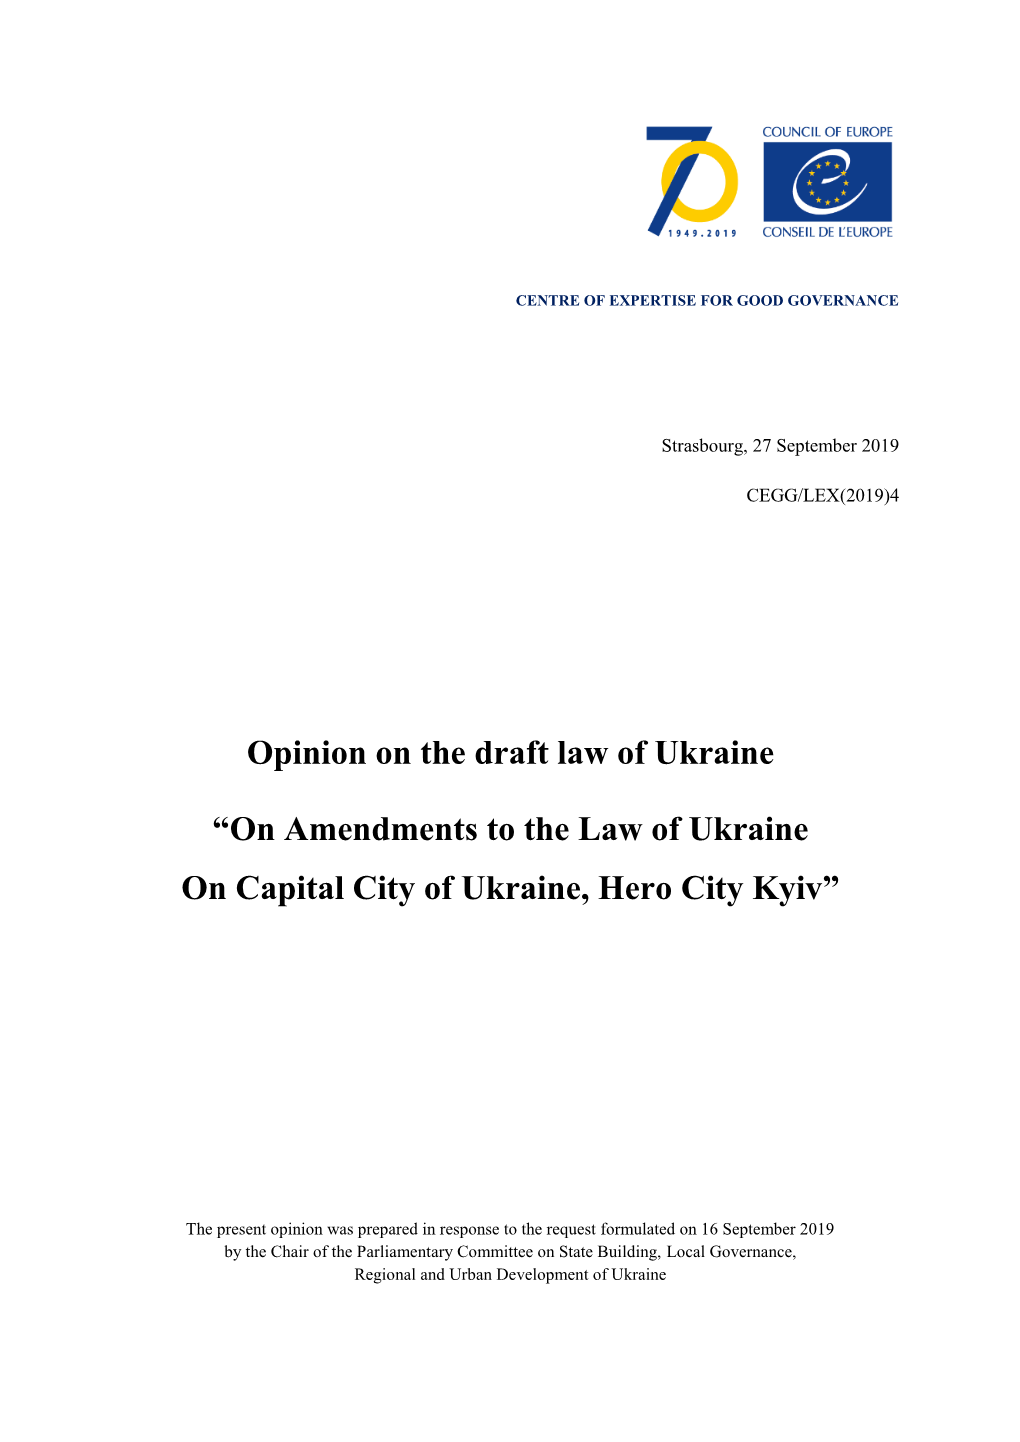 Opinion on the Draft Law of Ukraine “On Amendments to the Law Of